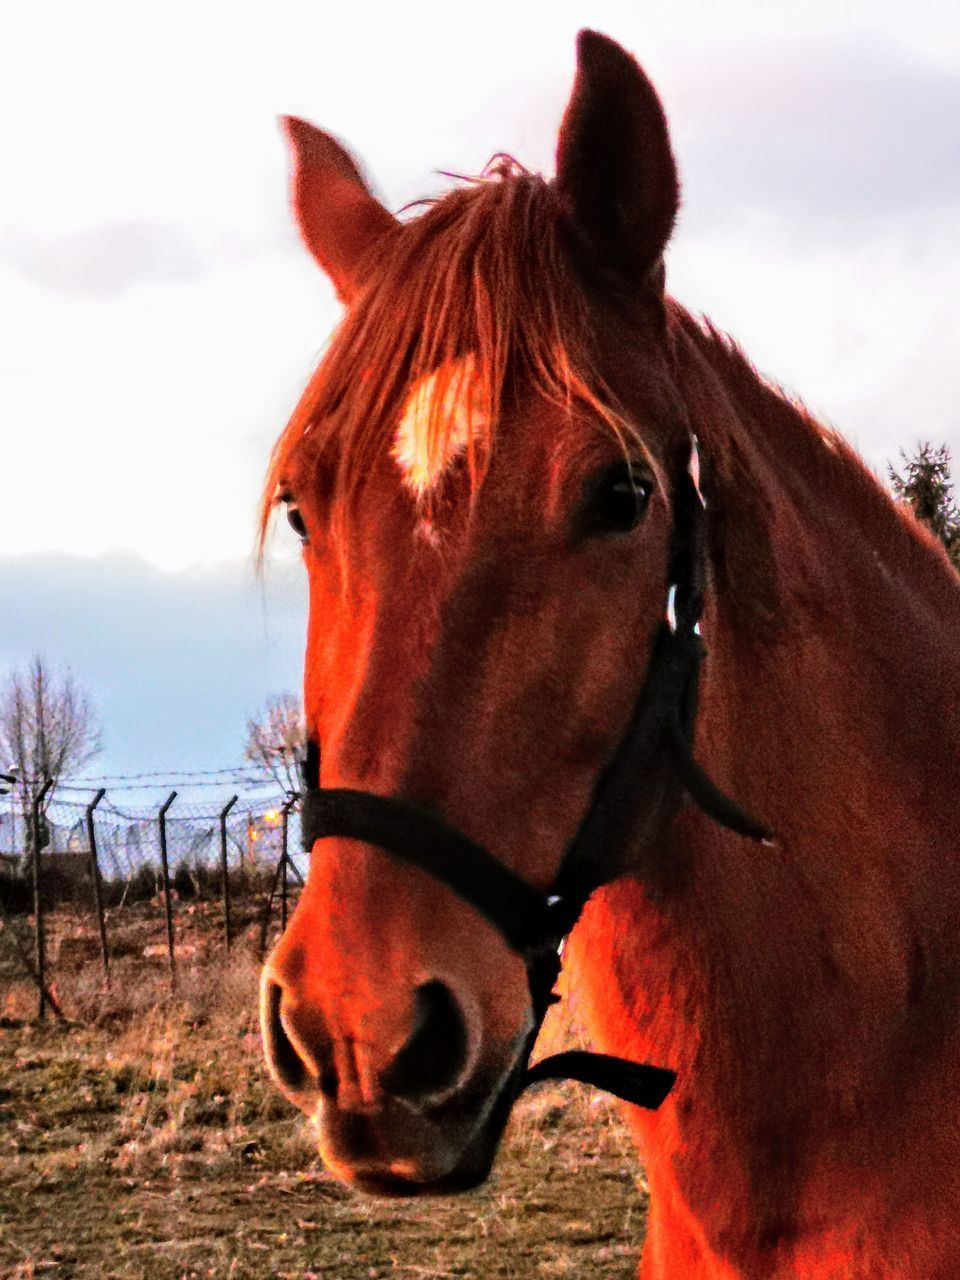 CLOSE-UP OF HORSE ON FIELD